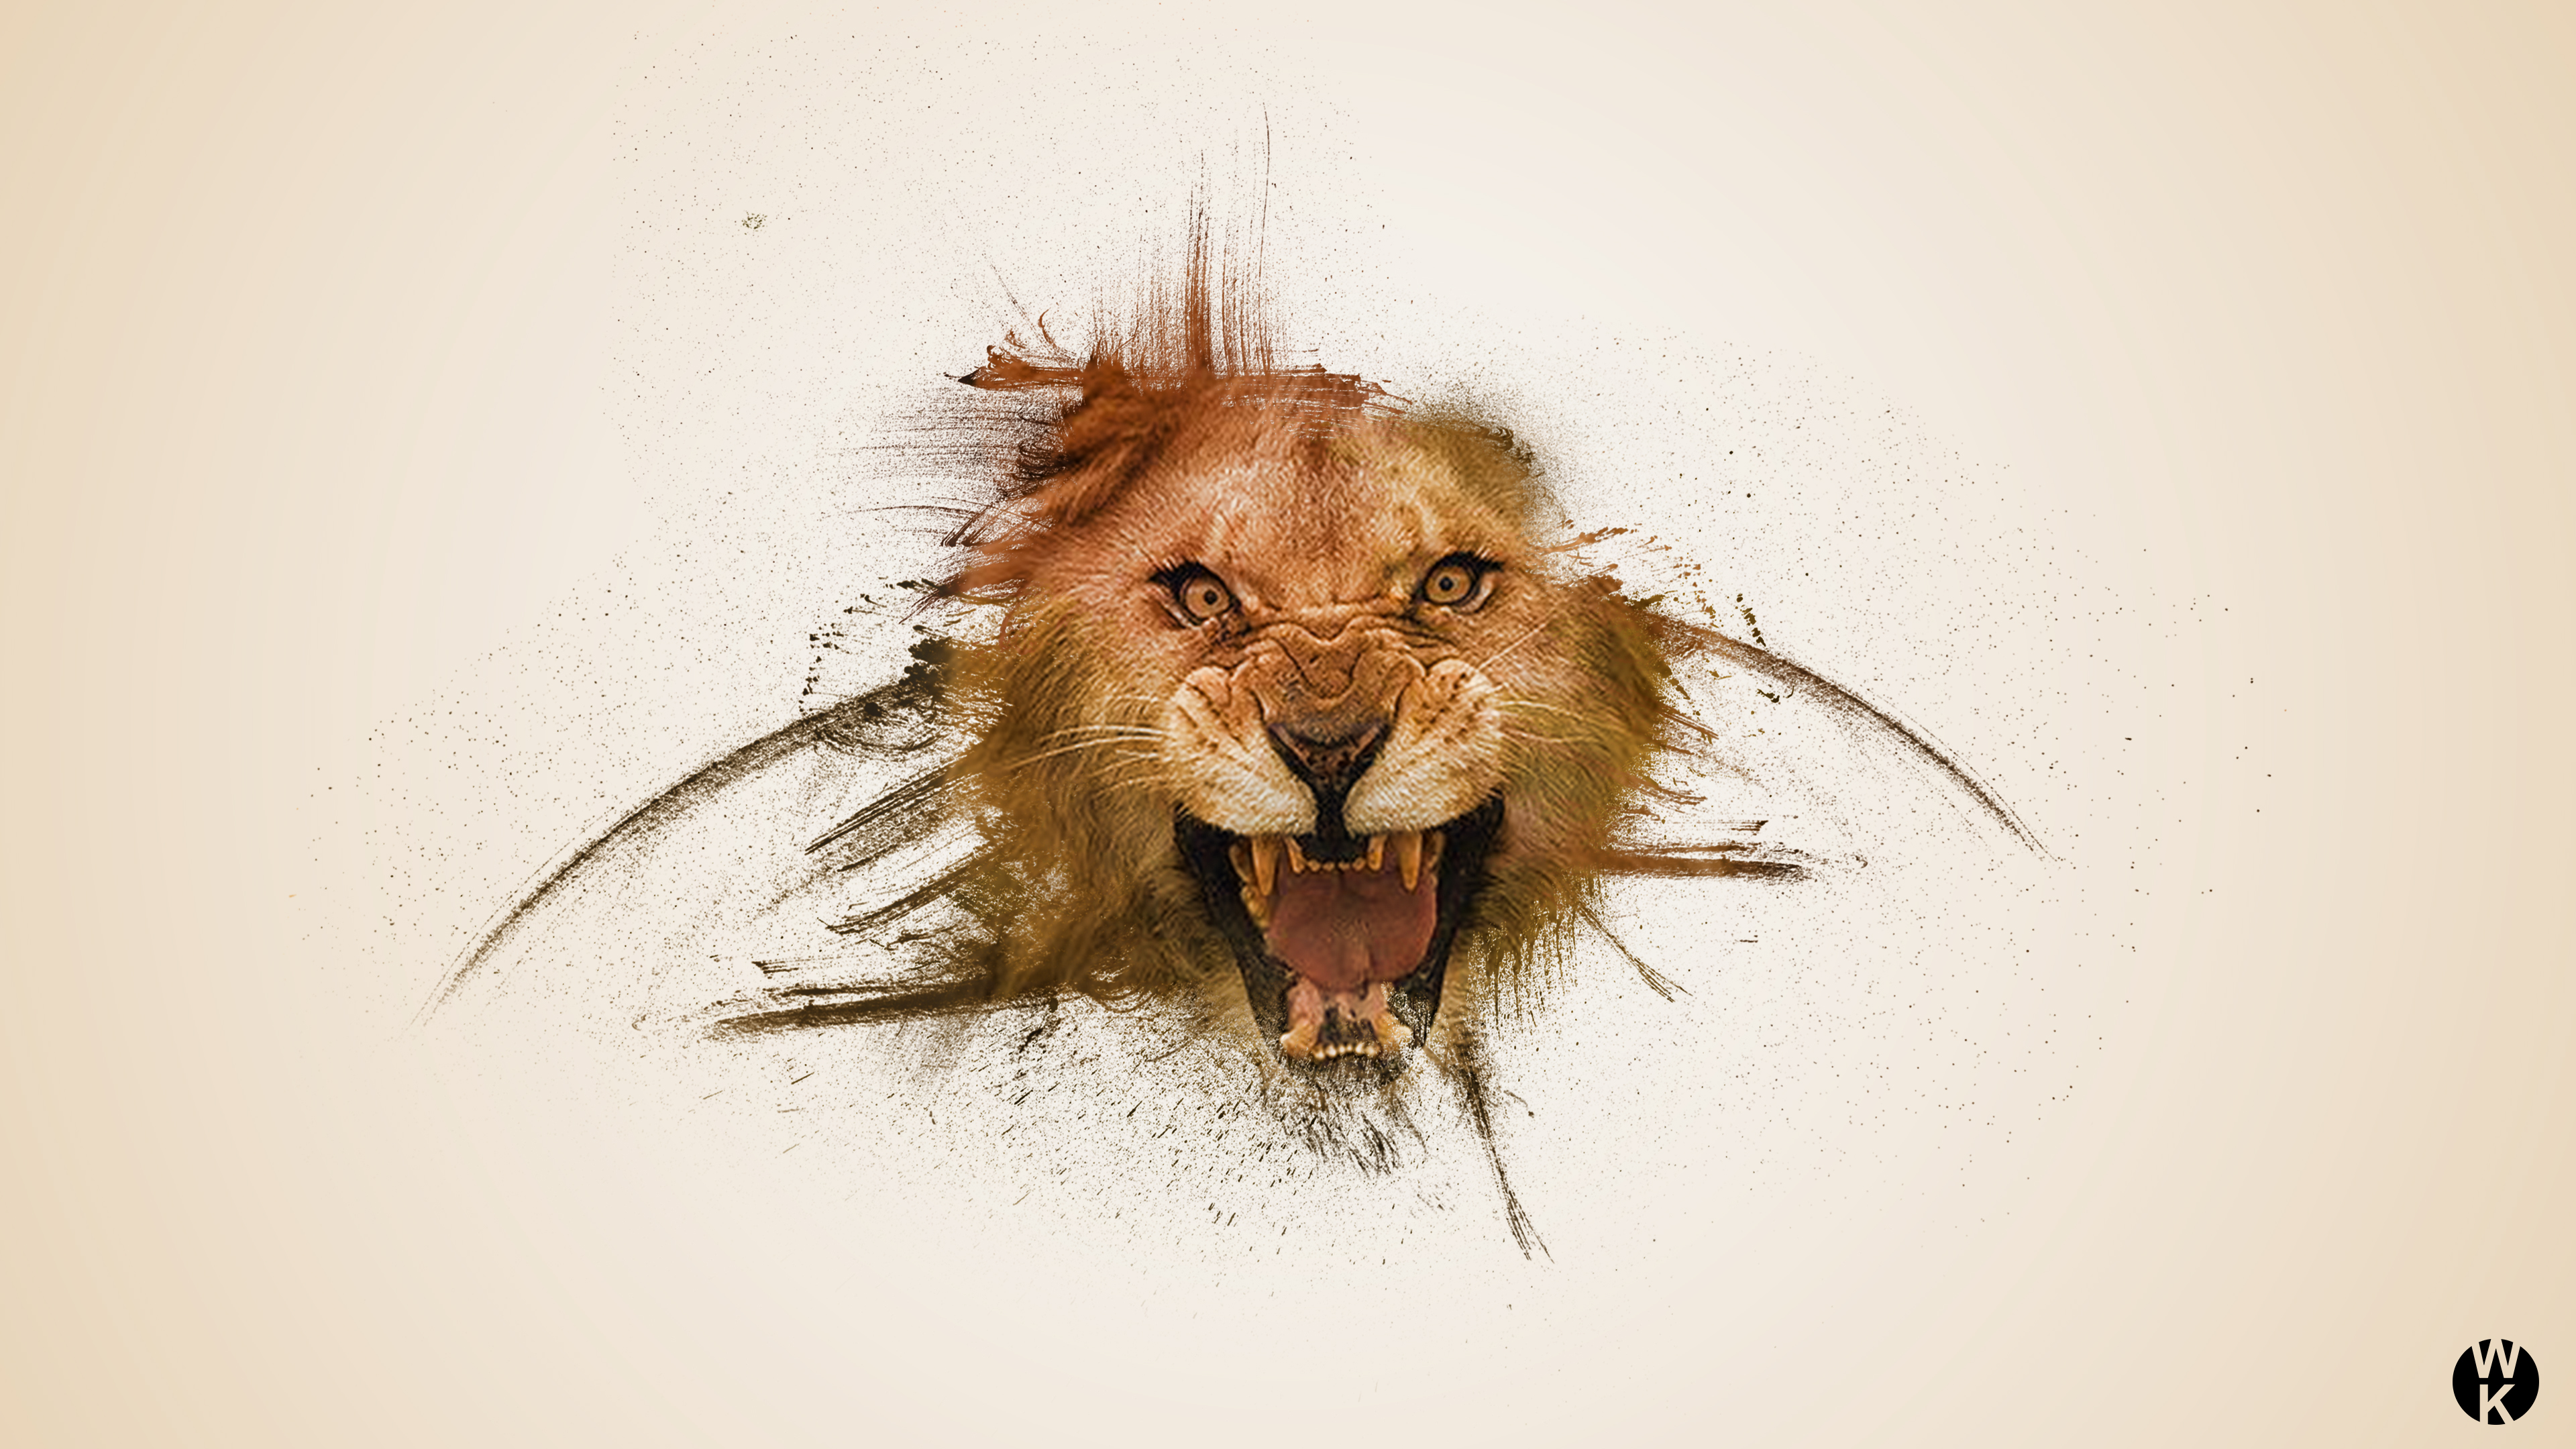 Download “Brave and Powerful, the Roaring Lion” Wallpaper | Wallpapers.com